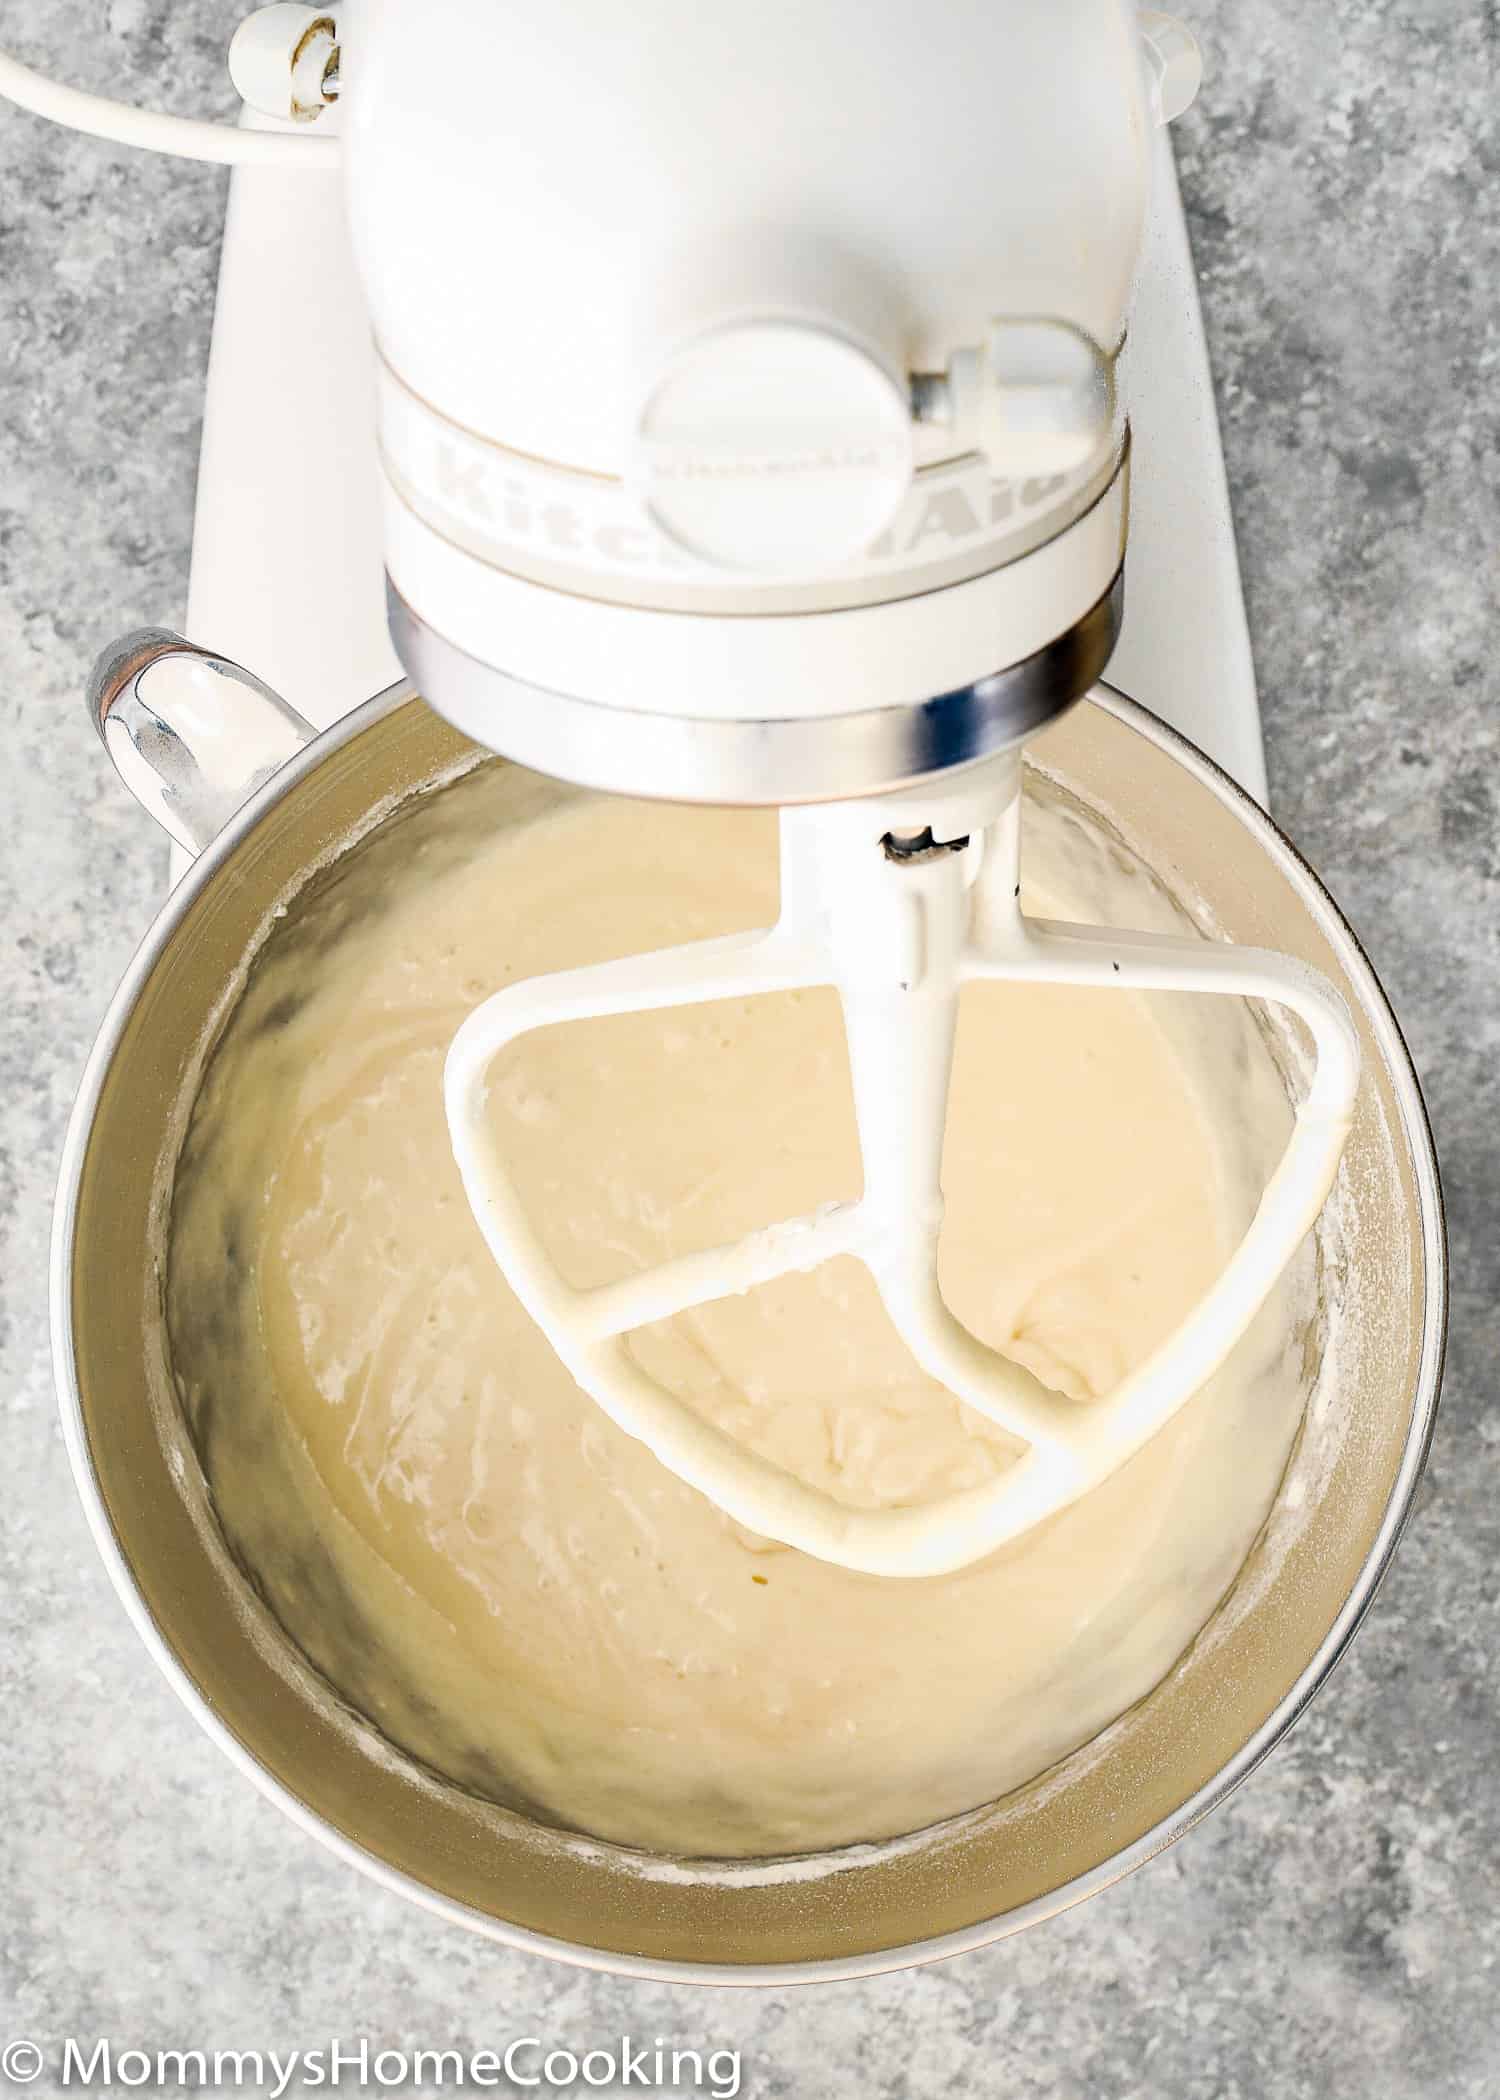 Do you or someone you love have egg allergy? Or did you just run out of eggs? Don't panic! You still can make that box cake that you are craving for. Learn my trick about How to Make a Cake Mix Box without Eggs. Pure convenience and amazingly delicious! https://mommyshomecooking.com